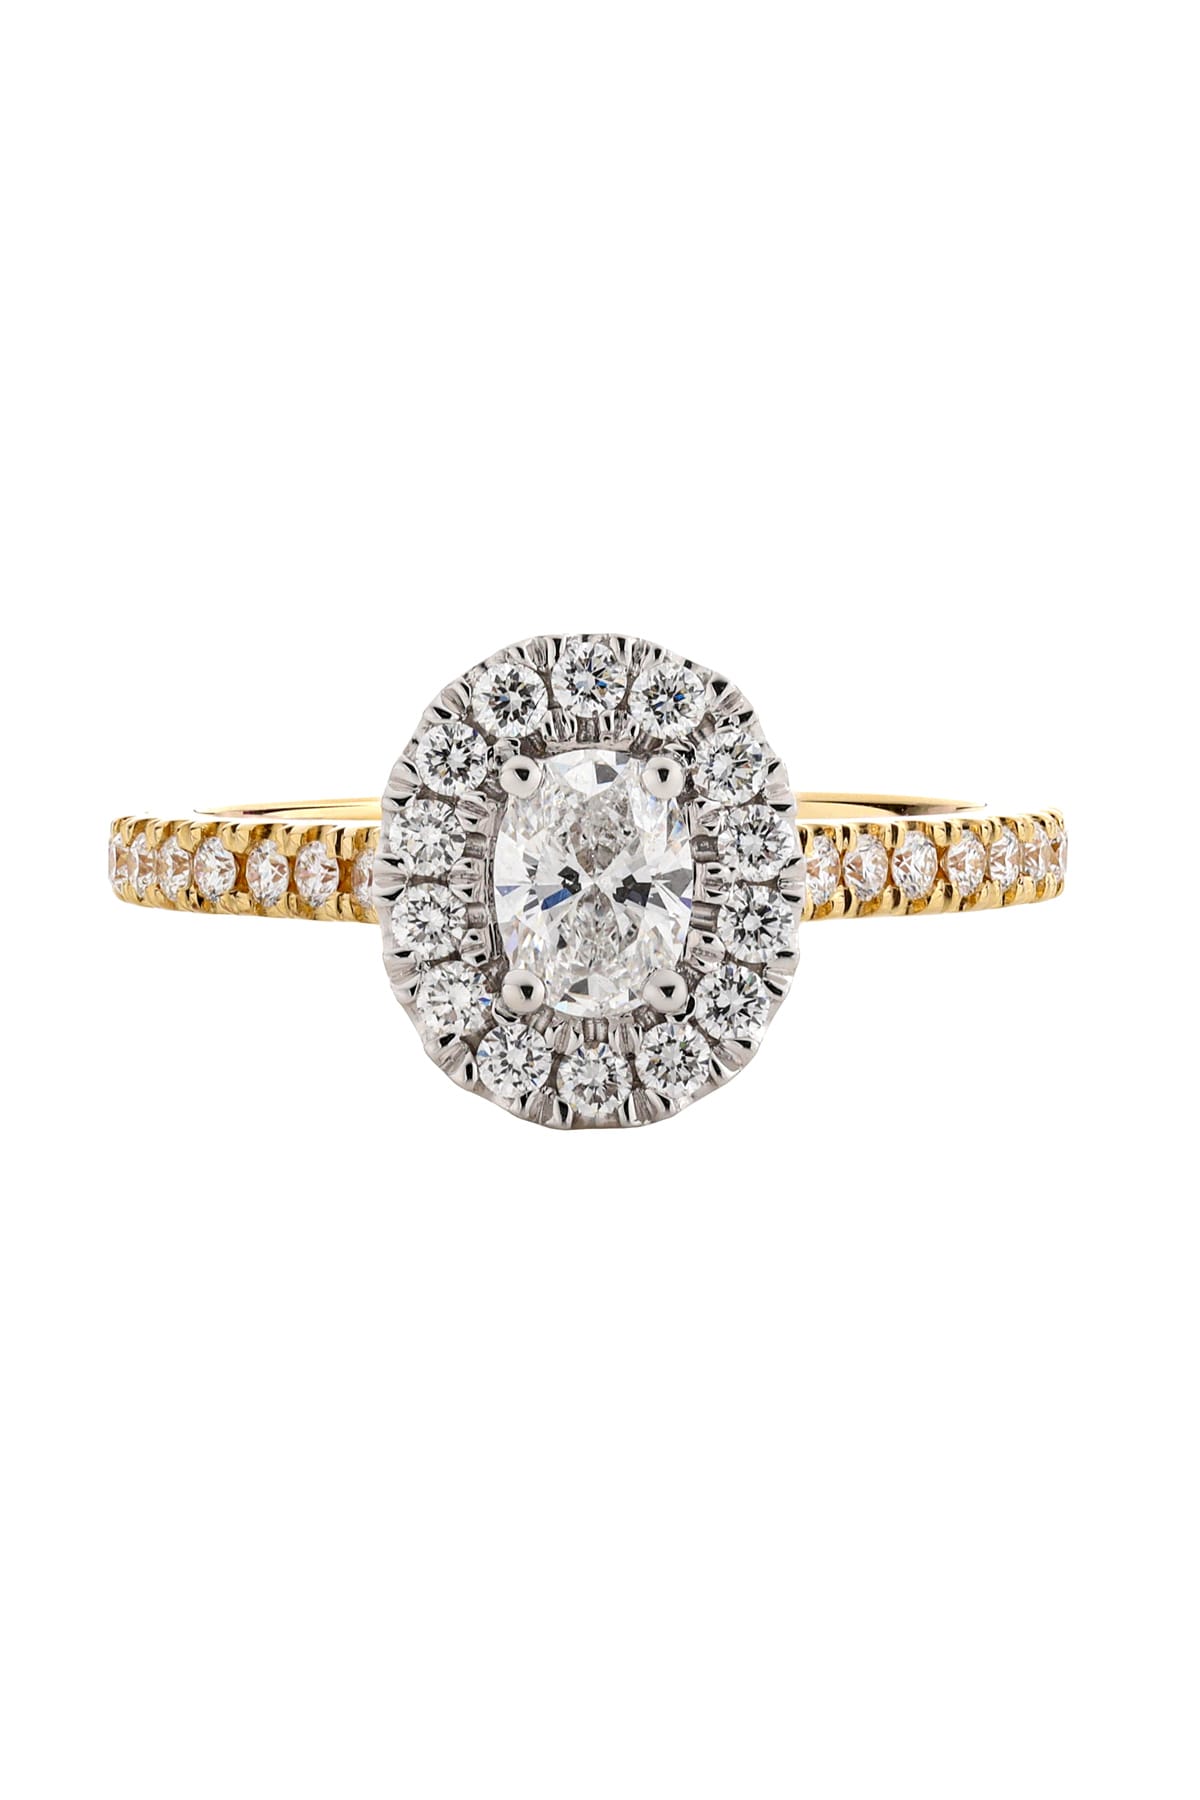 18 Carat Gold With 0.41 Carat Oval Diamond Halo Engagement Ring available at LeGassick Diamonds and Jewellery Gold Coast, Australia.